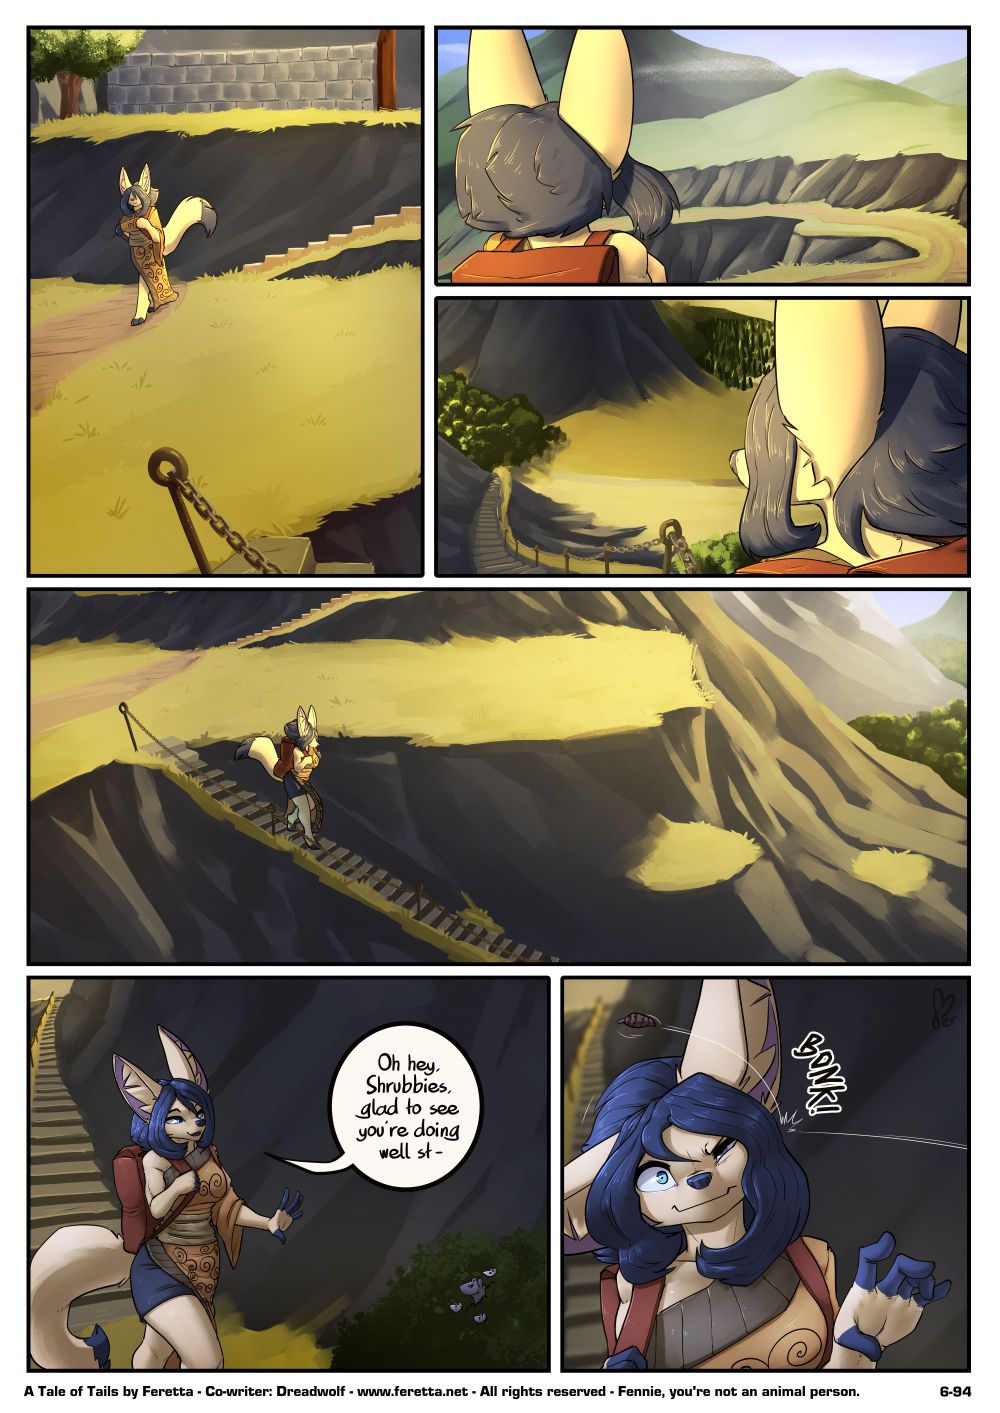 [Feretta] A Tale of Tails: Chapter 6 - Paths converge (ongoing) 97